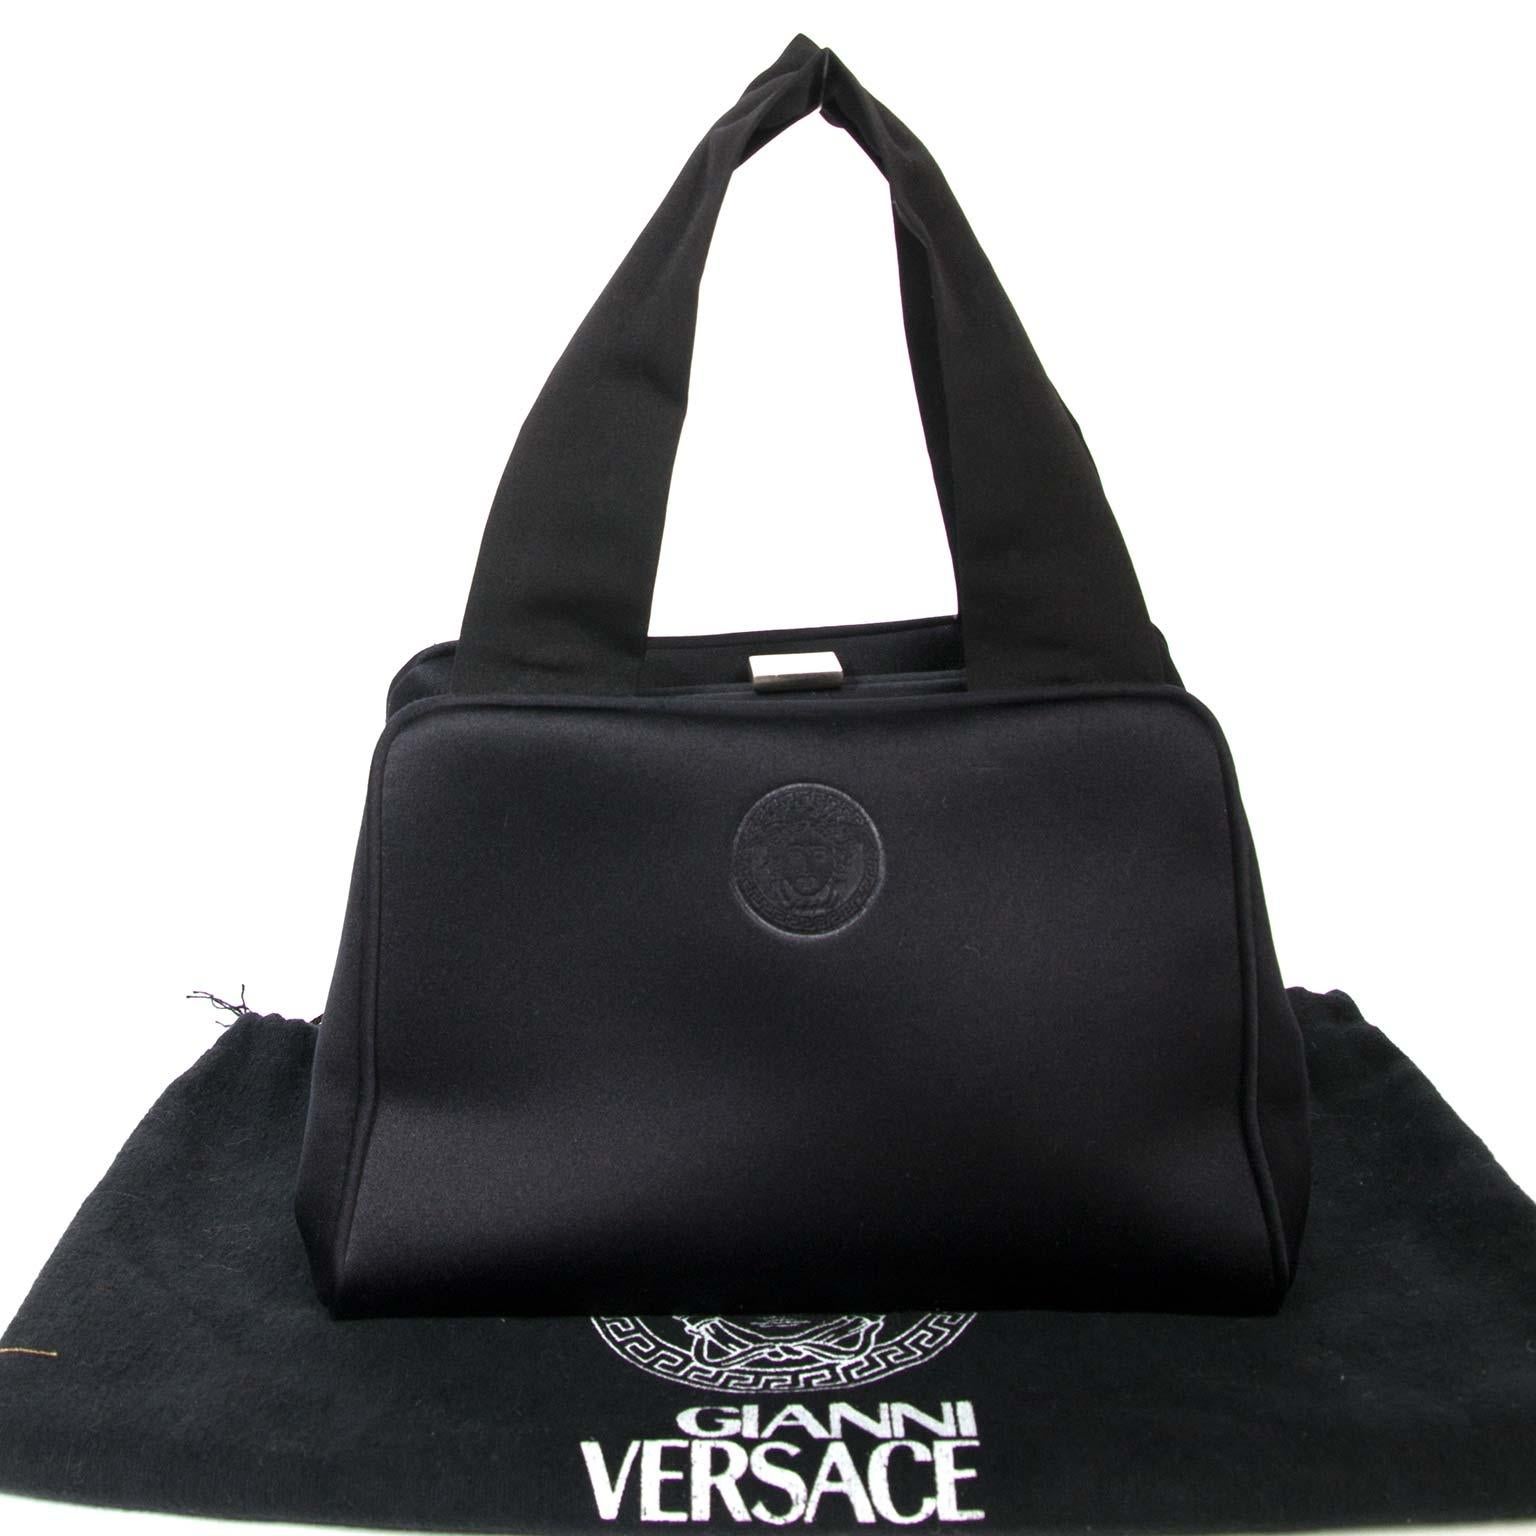 Very good preloved condition

Versace Small Black Satin Bag 

This small stunning bag by Versace adds some class to your outfit.
It's perfect for the night out. 
The inside consist of one main compartment with a side pocket. 
It opens and closes